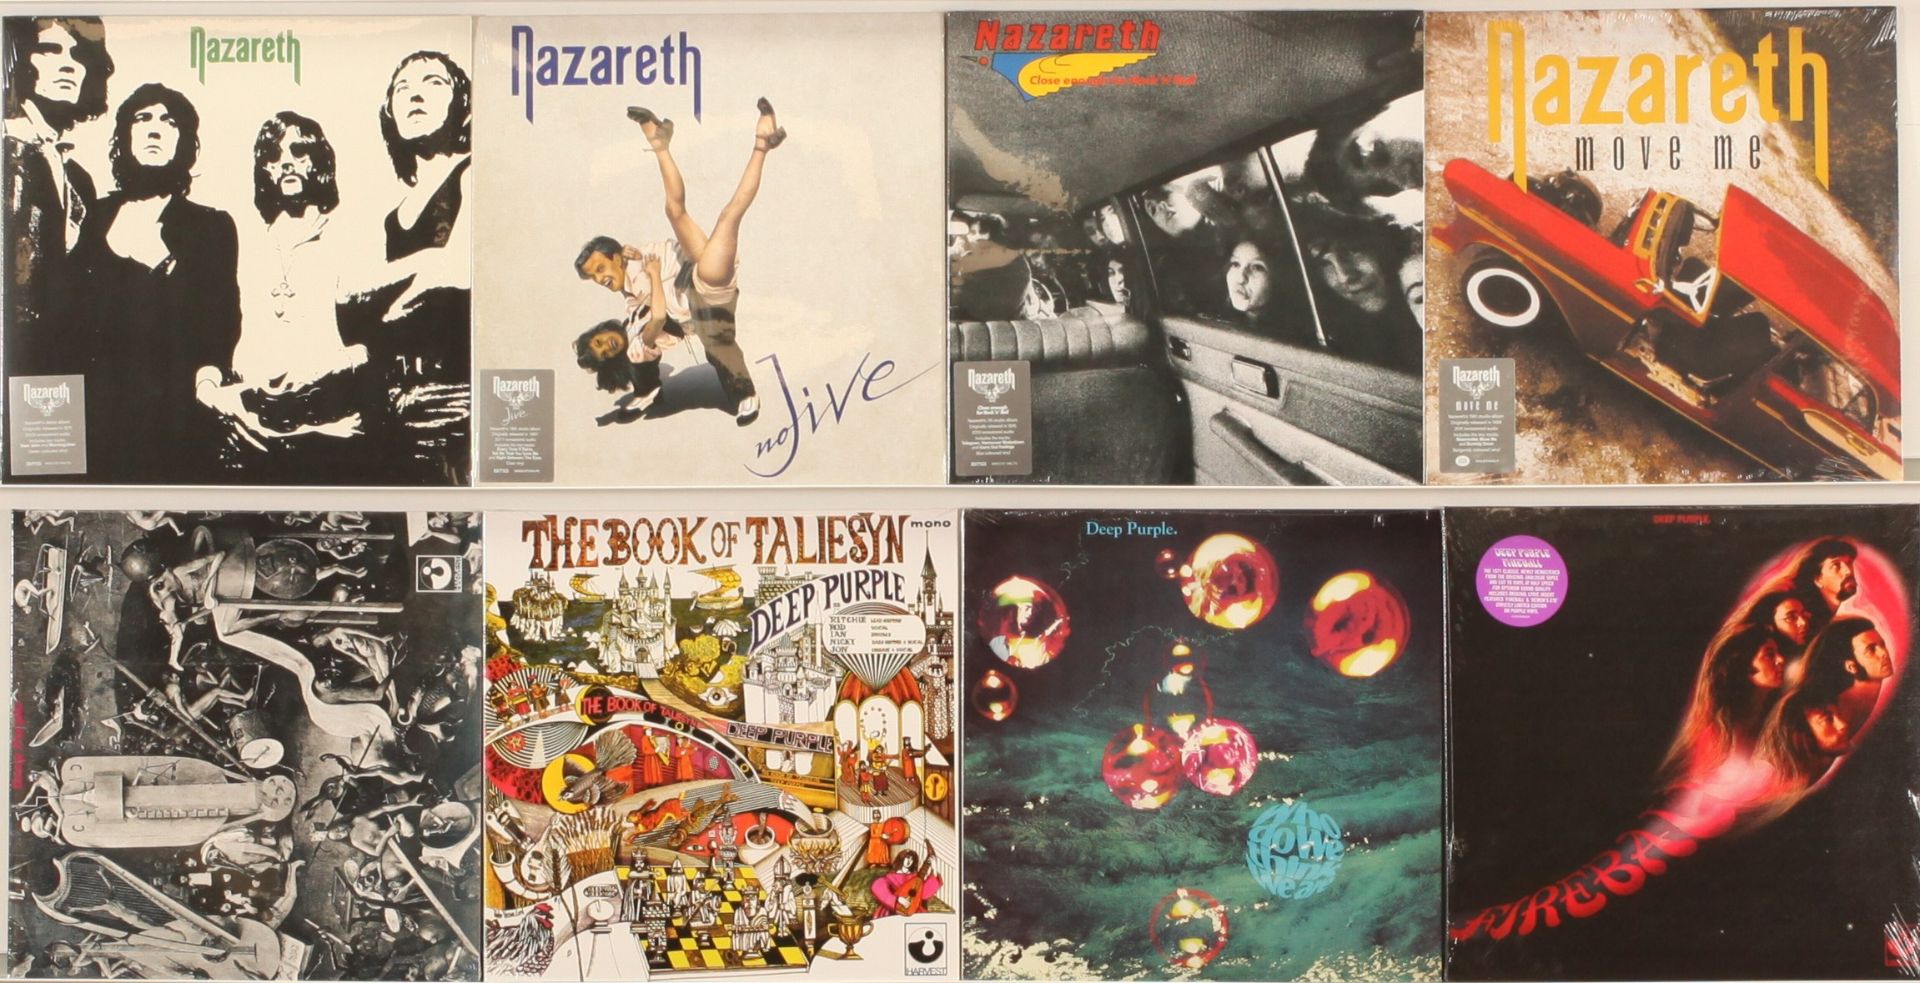 A collection of Recent Issue Nazareth and Deep Purple LPs, Nazareth titles to include (1) Nazaret...